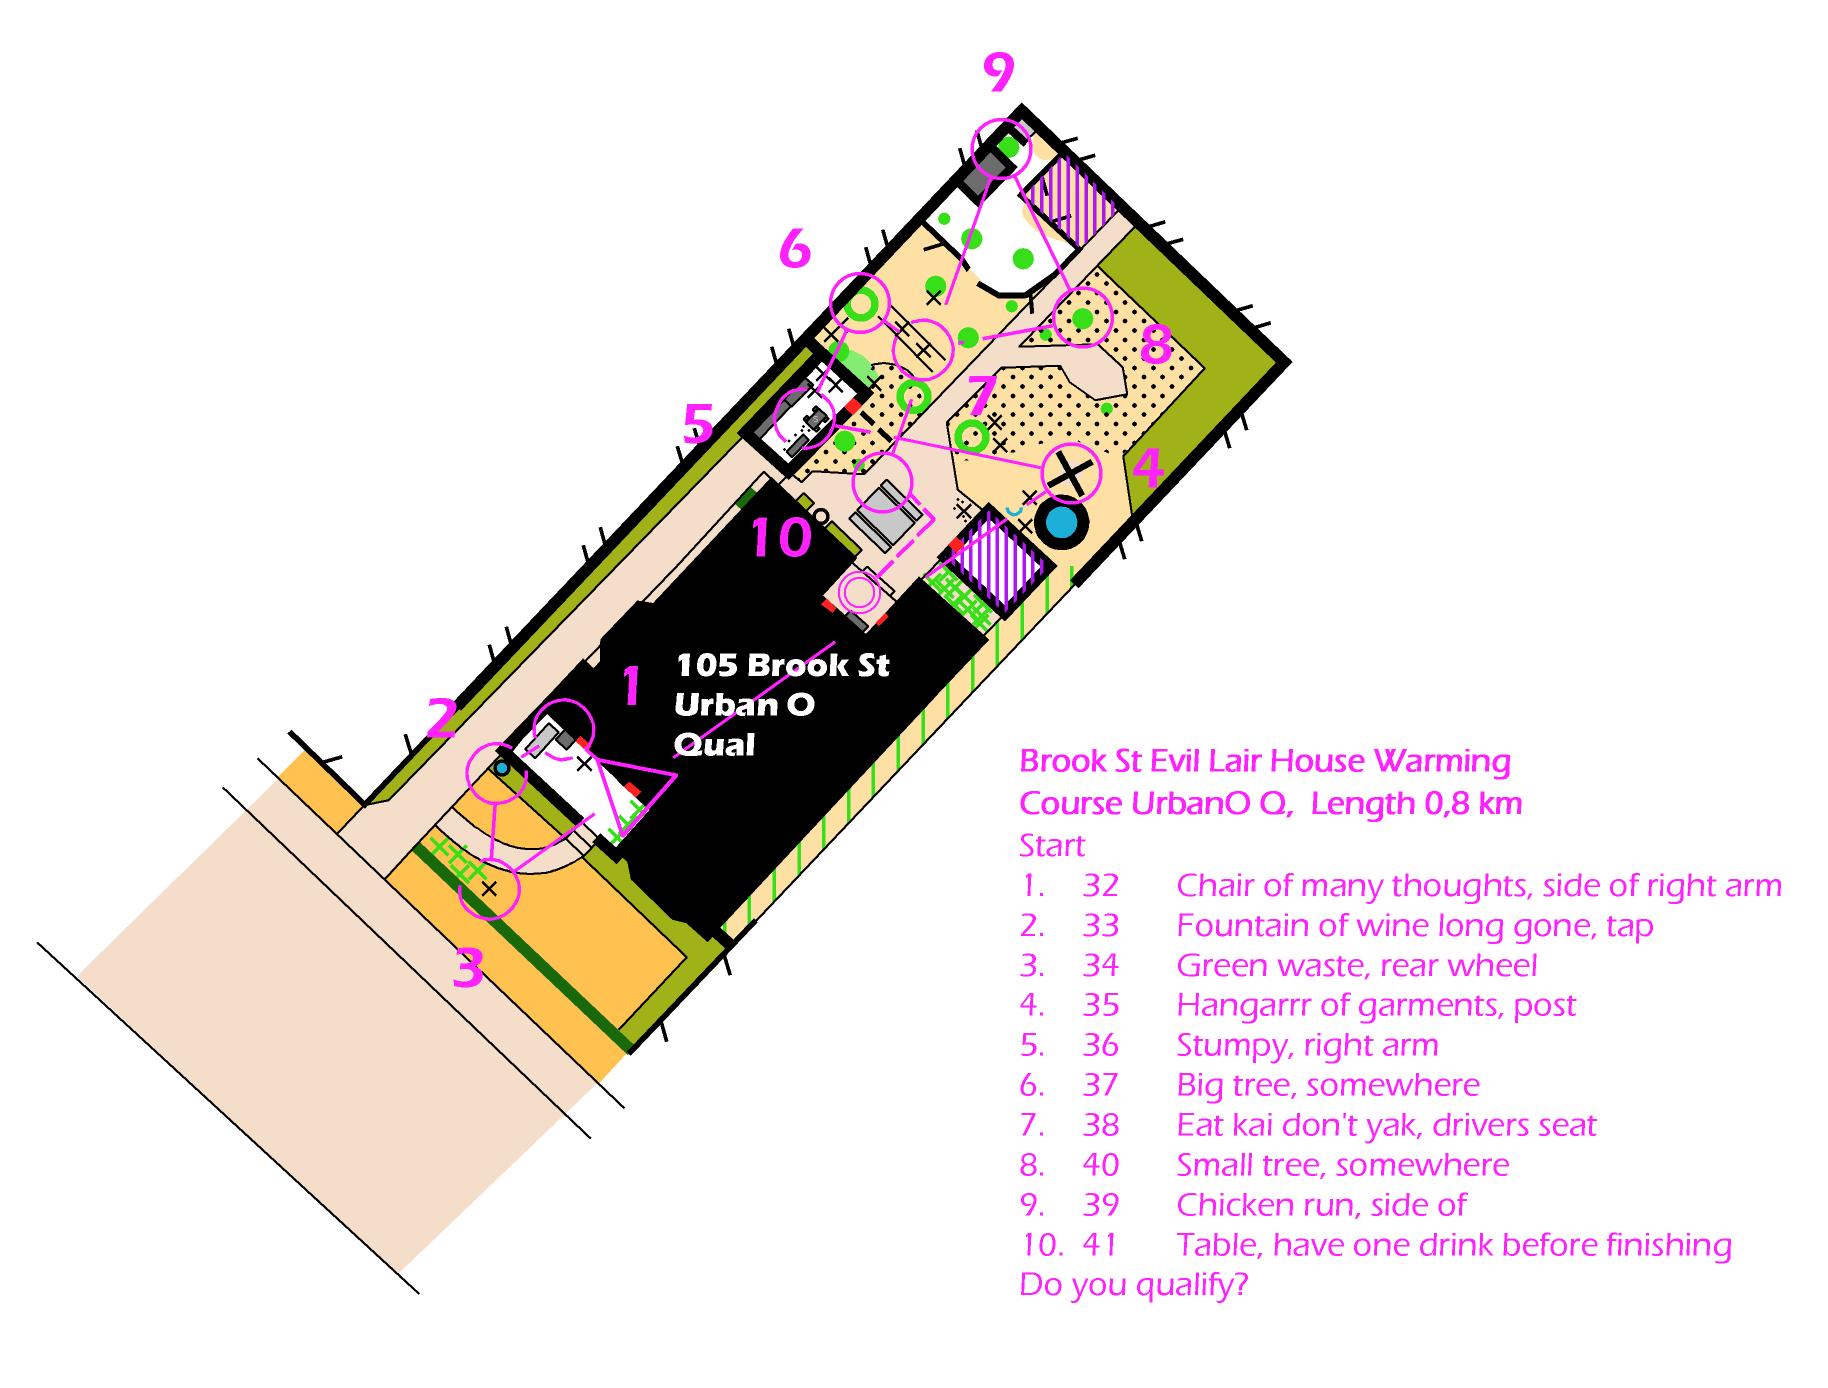 House Warming Qualification (2019-07-20)